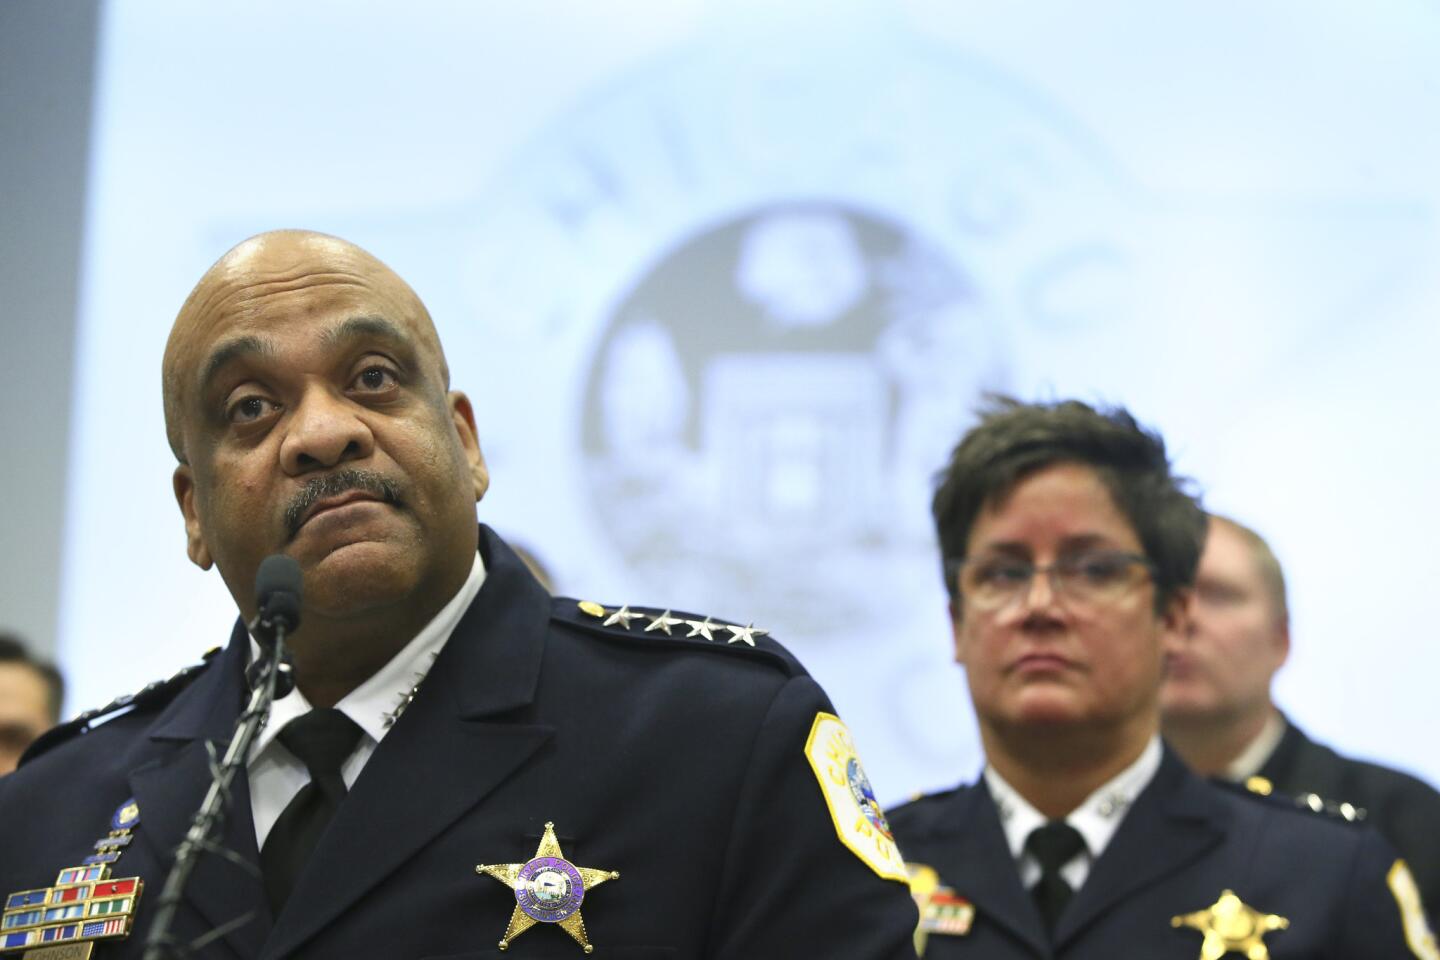 Chicago police Superintendent Eddie Johnson speaks about the details of the arrest and charges of Jussie Smollett at Chicago police headquarters on Feb. 21, 2019. Pictured on the right is chief of detectives, Melissa Staples.